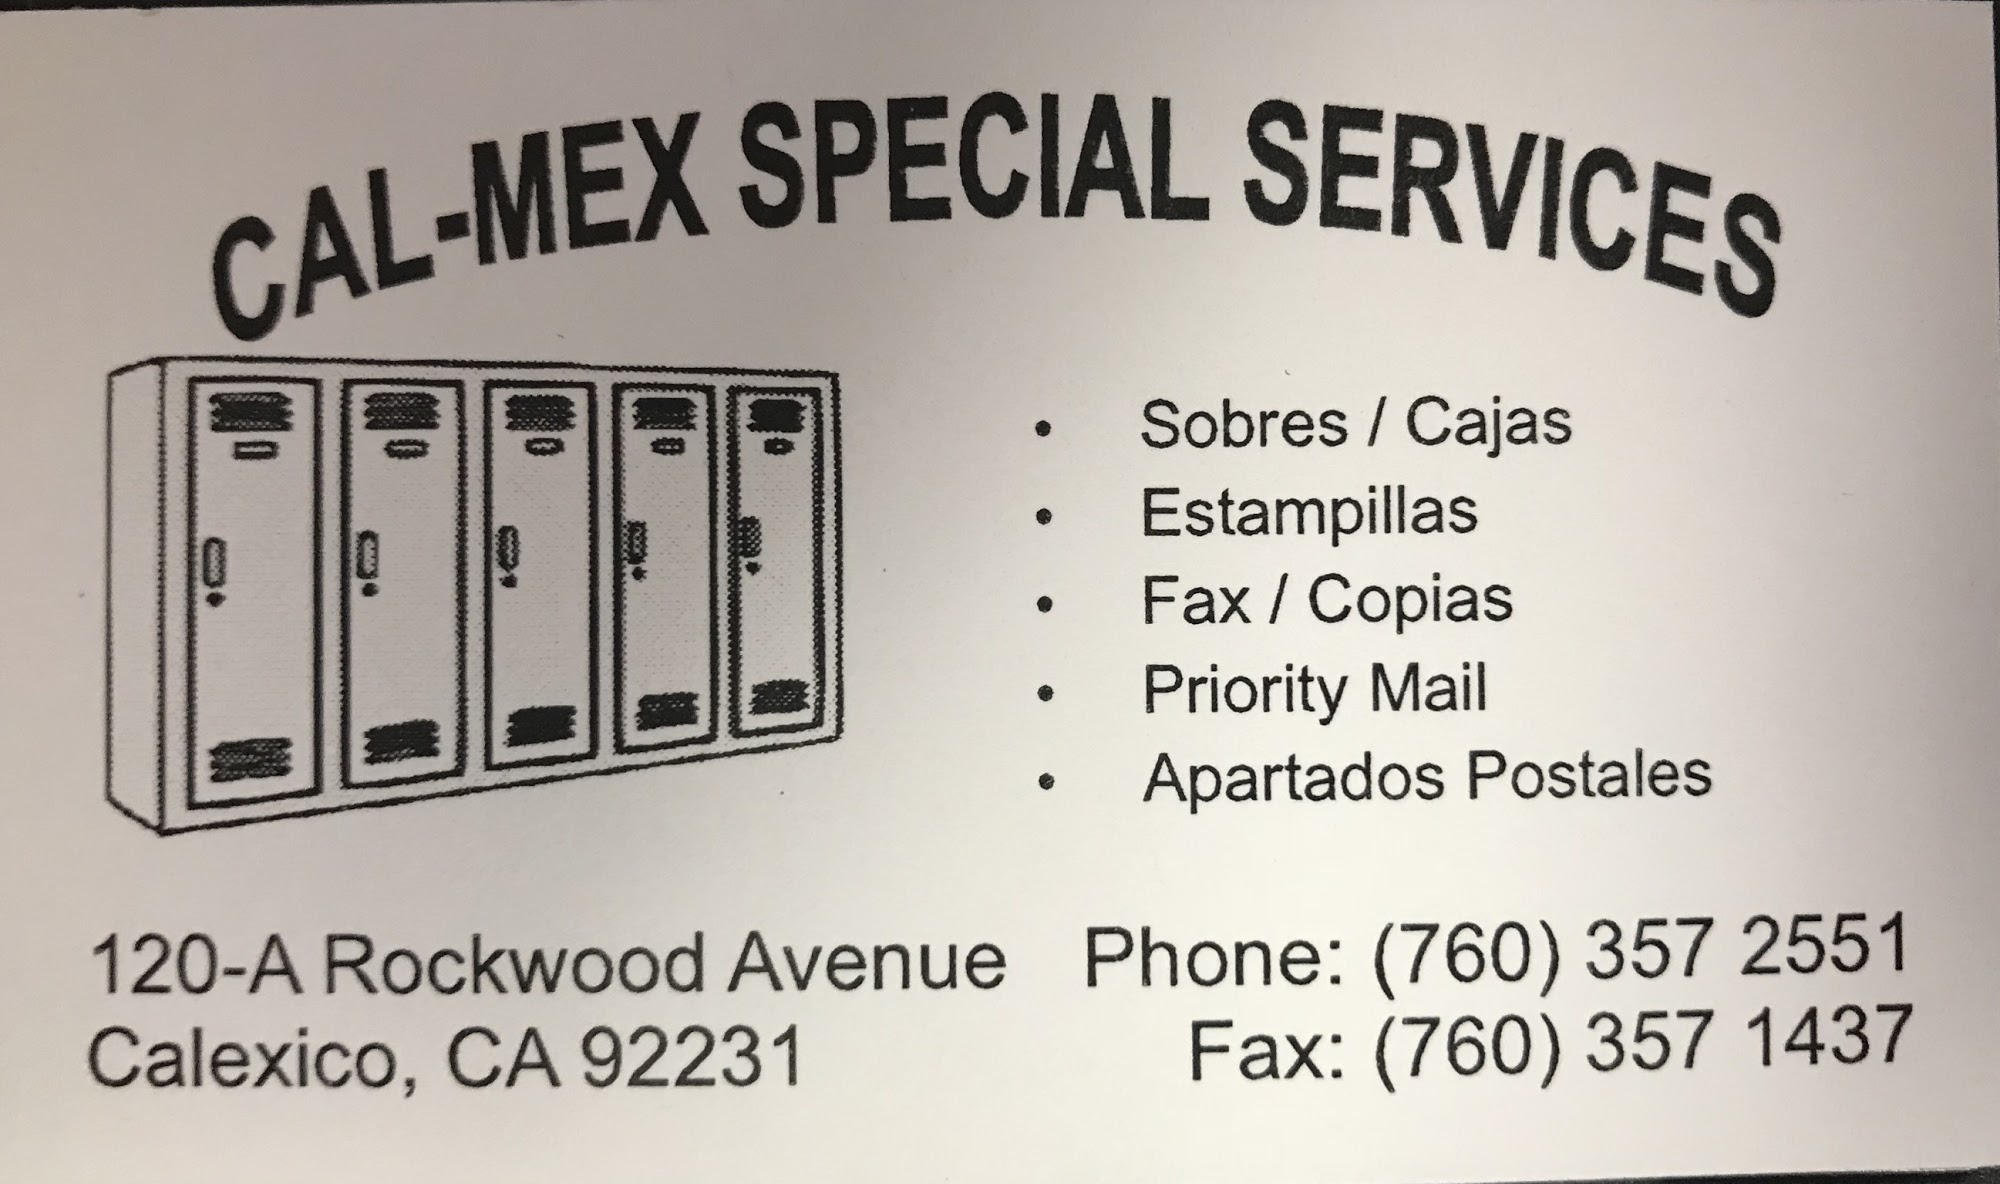 Cal-Mex Special Services